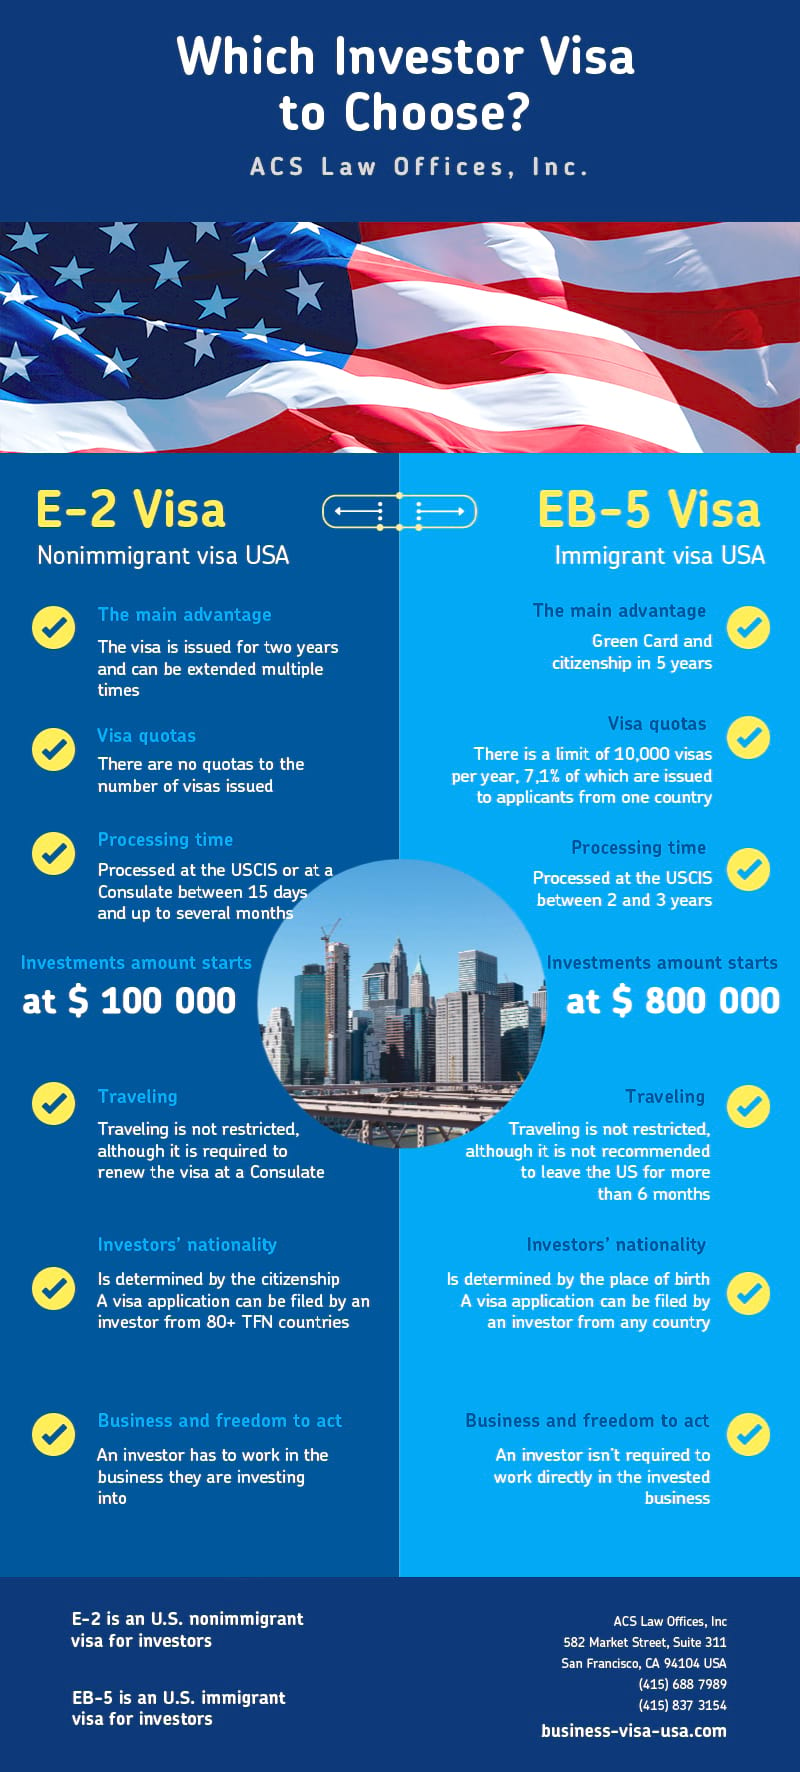 The Differences Between EB-5 and E-2 Visa